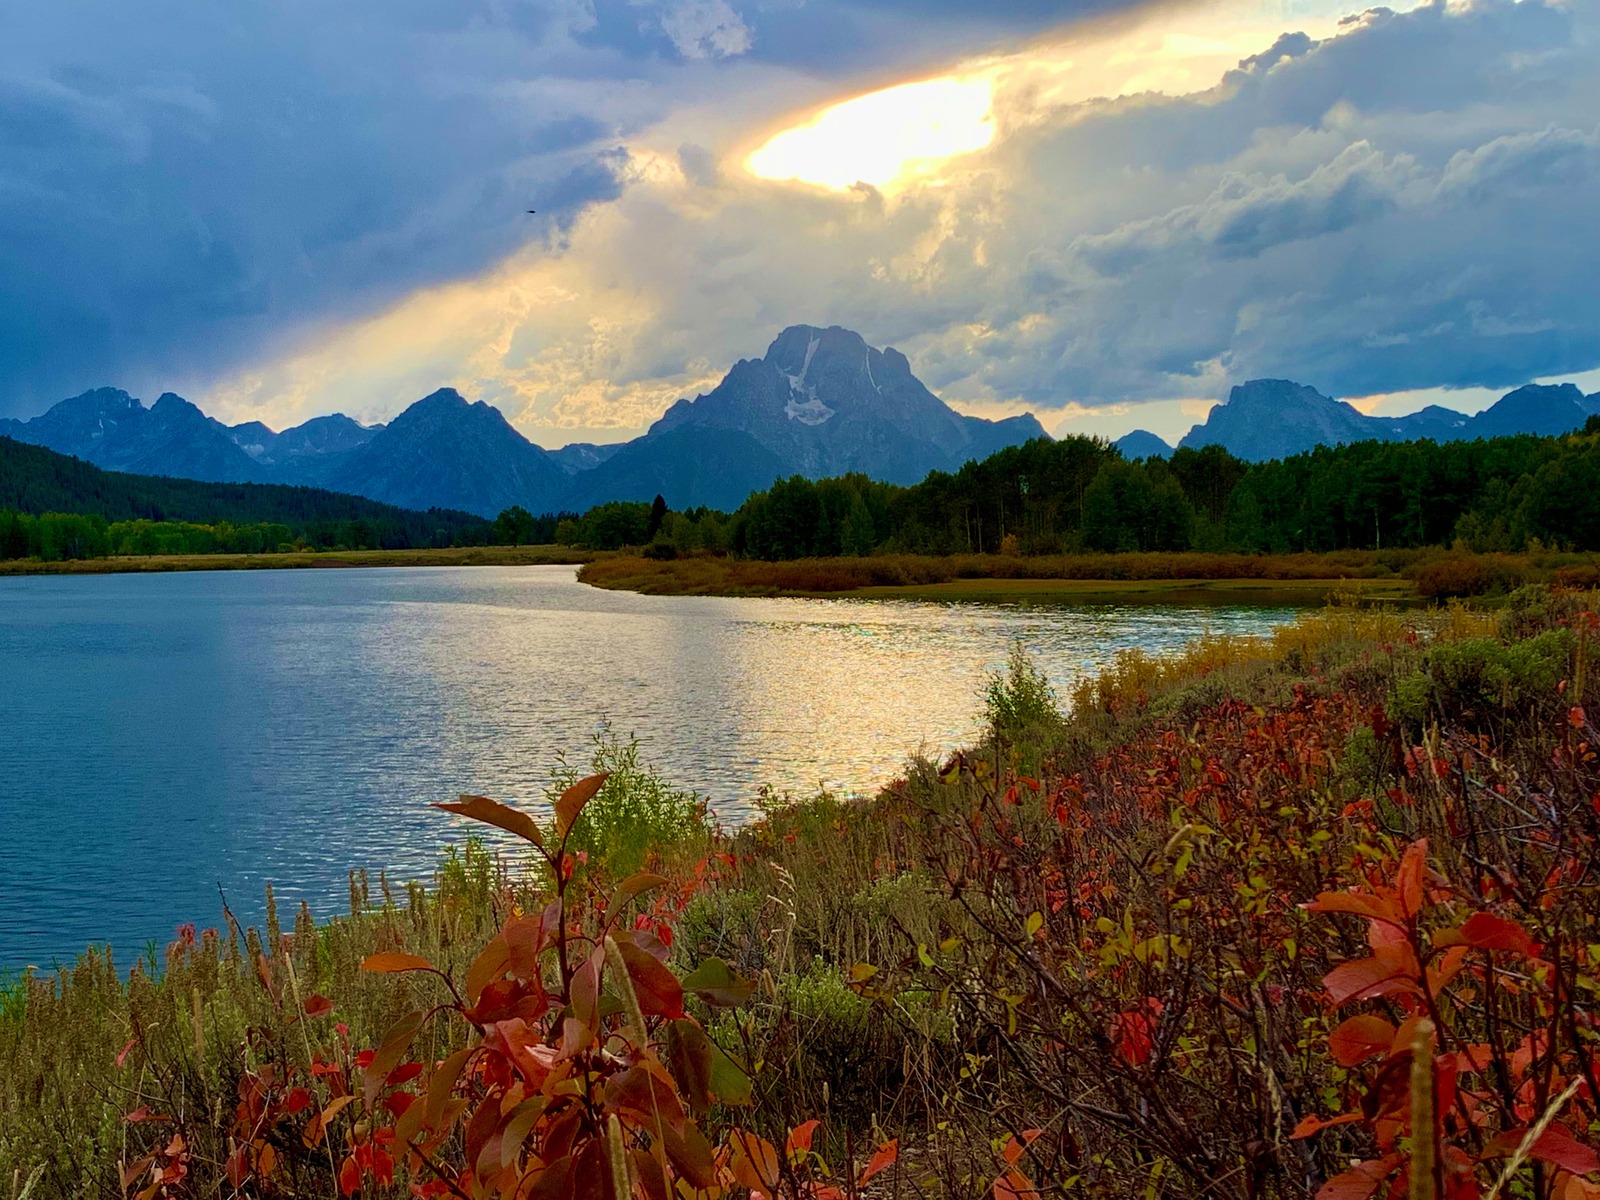 The Tetons in Jackson Hole and Grand Teton National Park, fronted by the Oxbow Bend of the Snake River. The Oxbow is known as one of the best places for diverse wildlife watching in America. We should never forget, however, that had conservation efforts failed in the 1930s and 1940s, very likely stretches of the river today would be girded by trophy homes and resorts with motorboats plying the water. Some old guard Jackson Hole families claimed that creating Grand Teton Park and expanding its boundaries would destroy the Jackson Hole economy. Not only were the opponents of conservation wrong but fortunately they were overruled. Photo by Todd Wilkinson